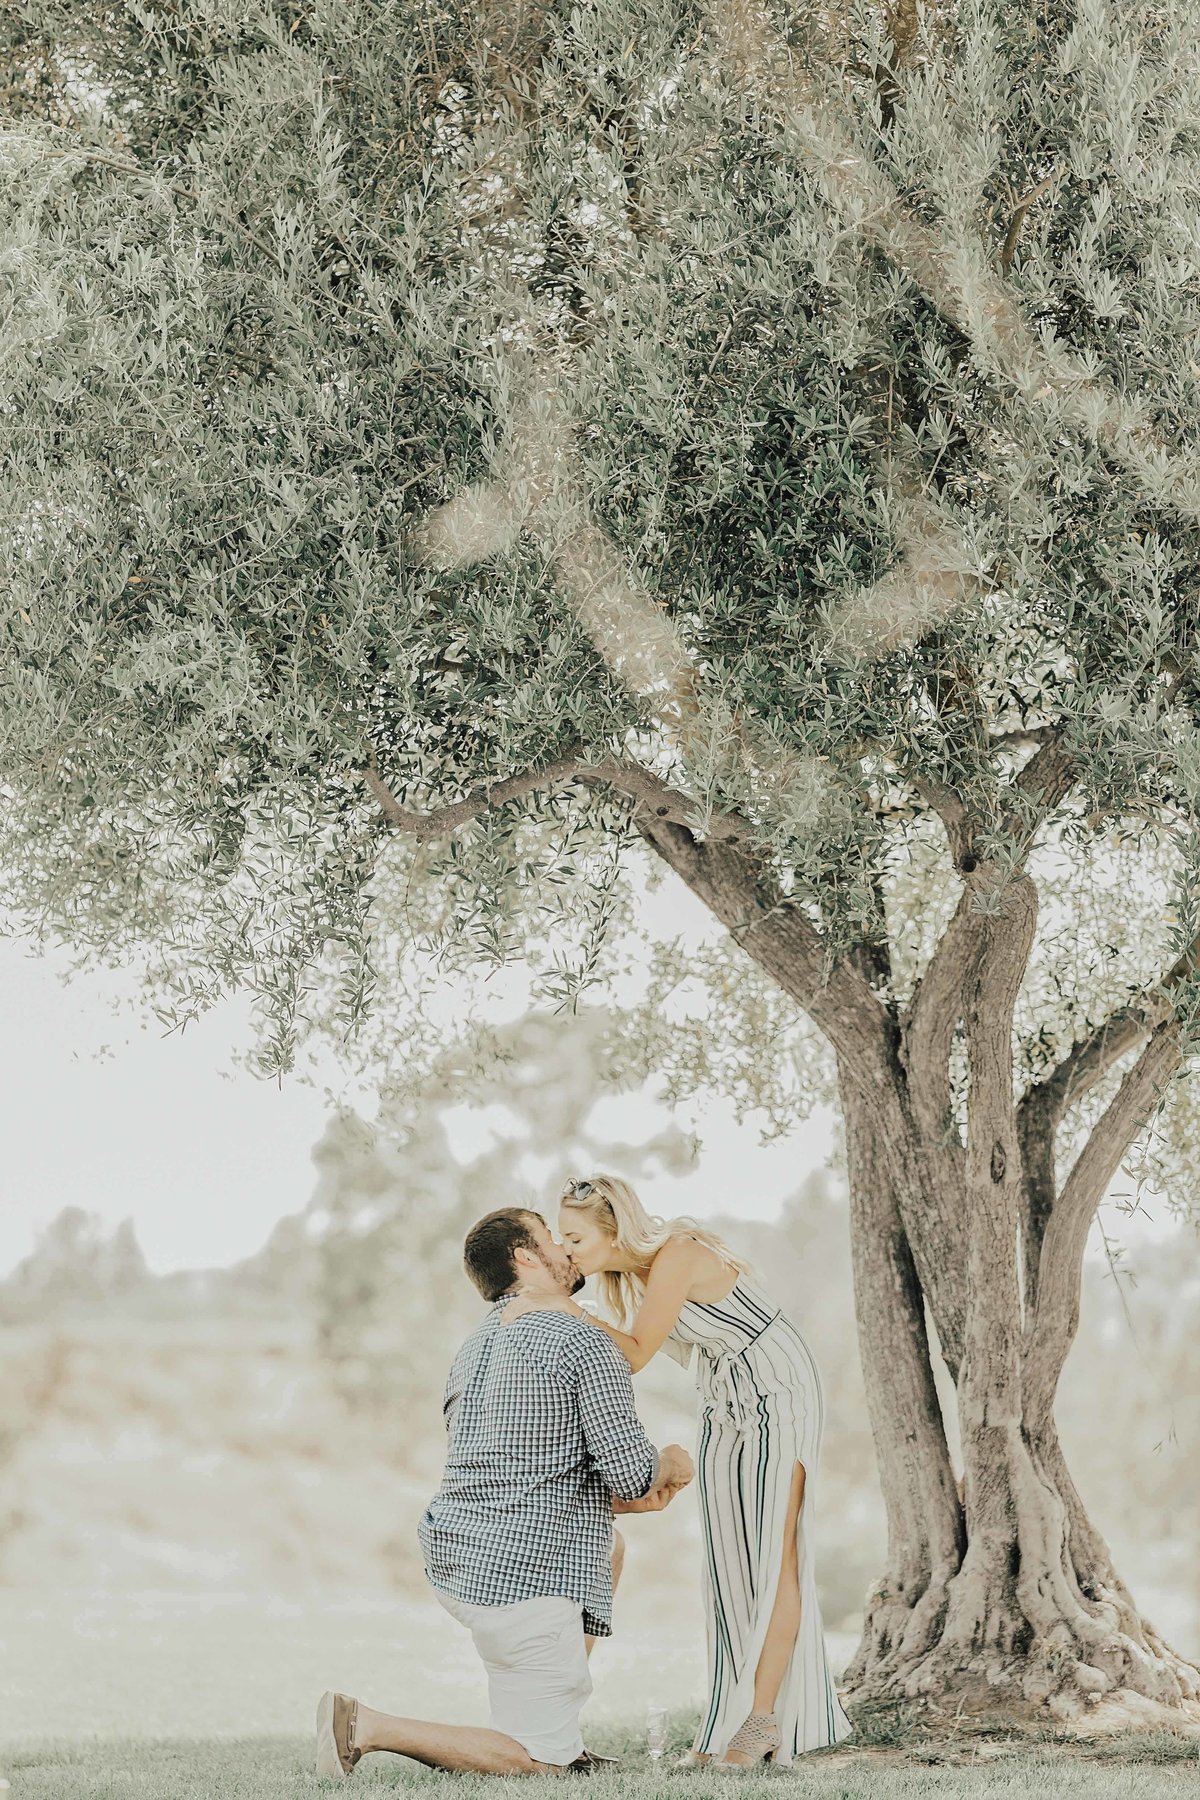 Babsie-Ly-Photography-Fine-Art-Film-Surprise-Proposal-Photographer-Temecula-Thornton-Winery-California-005